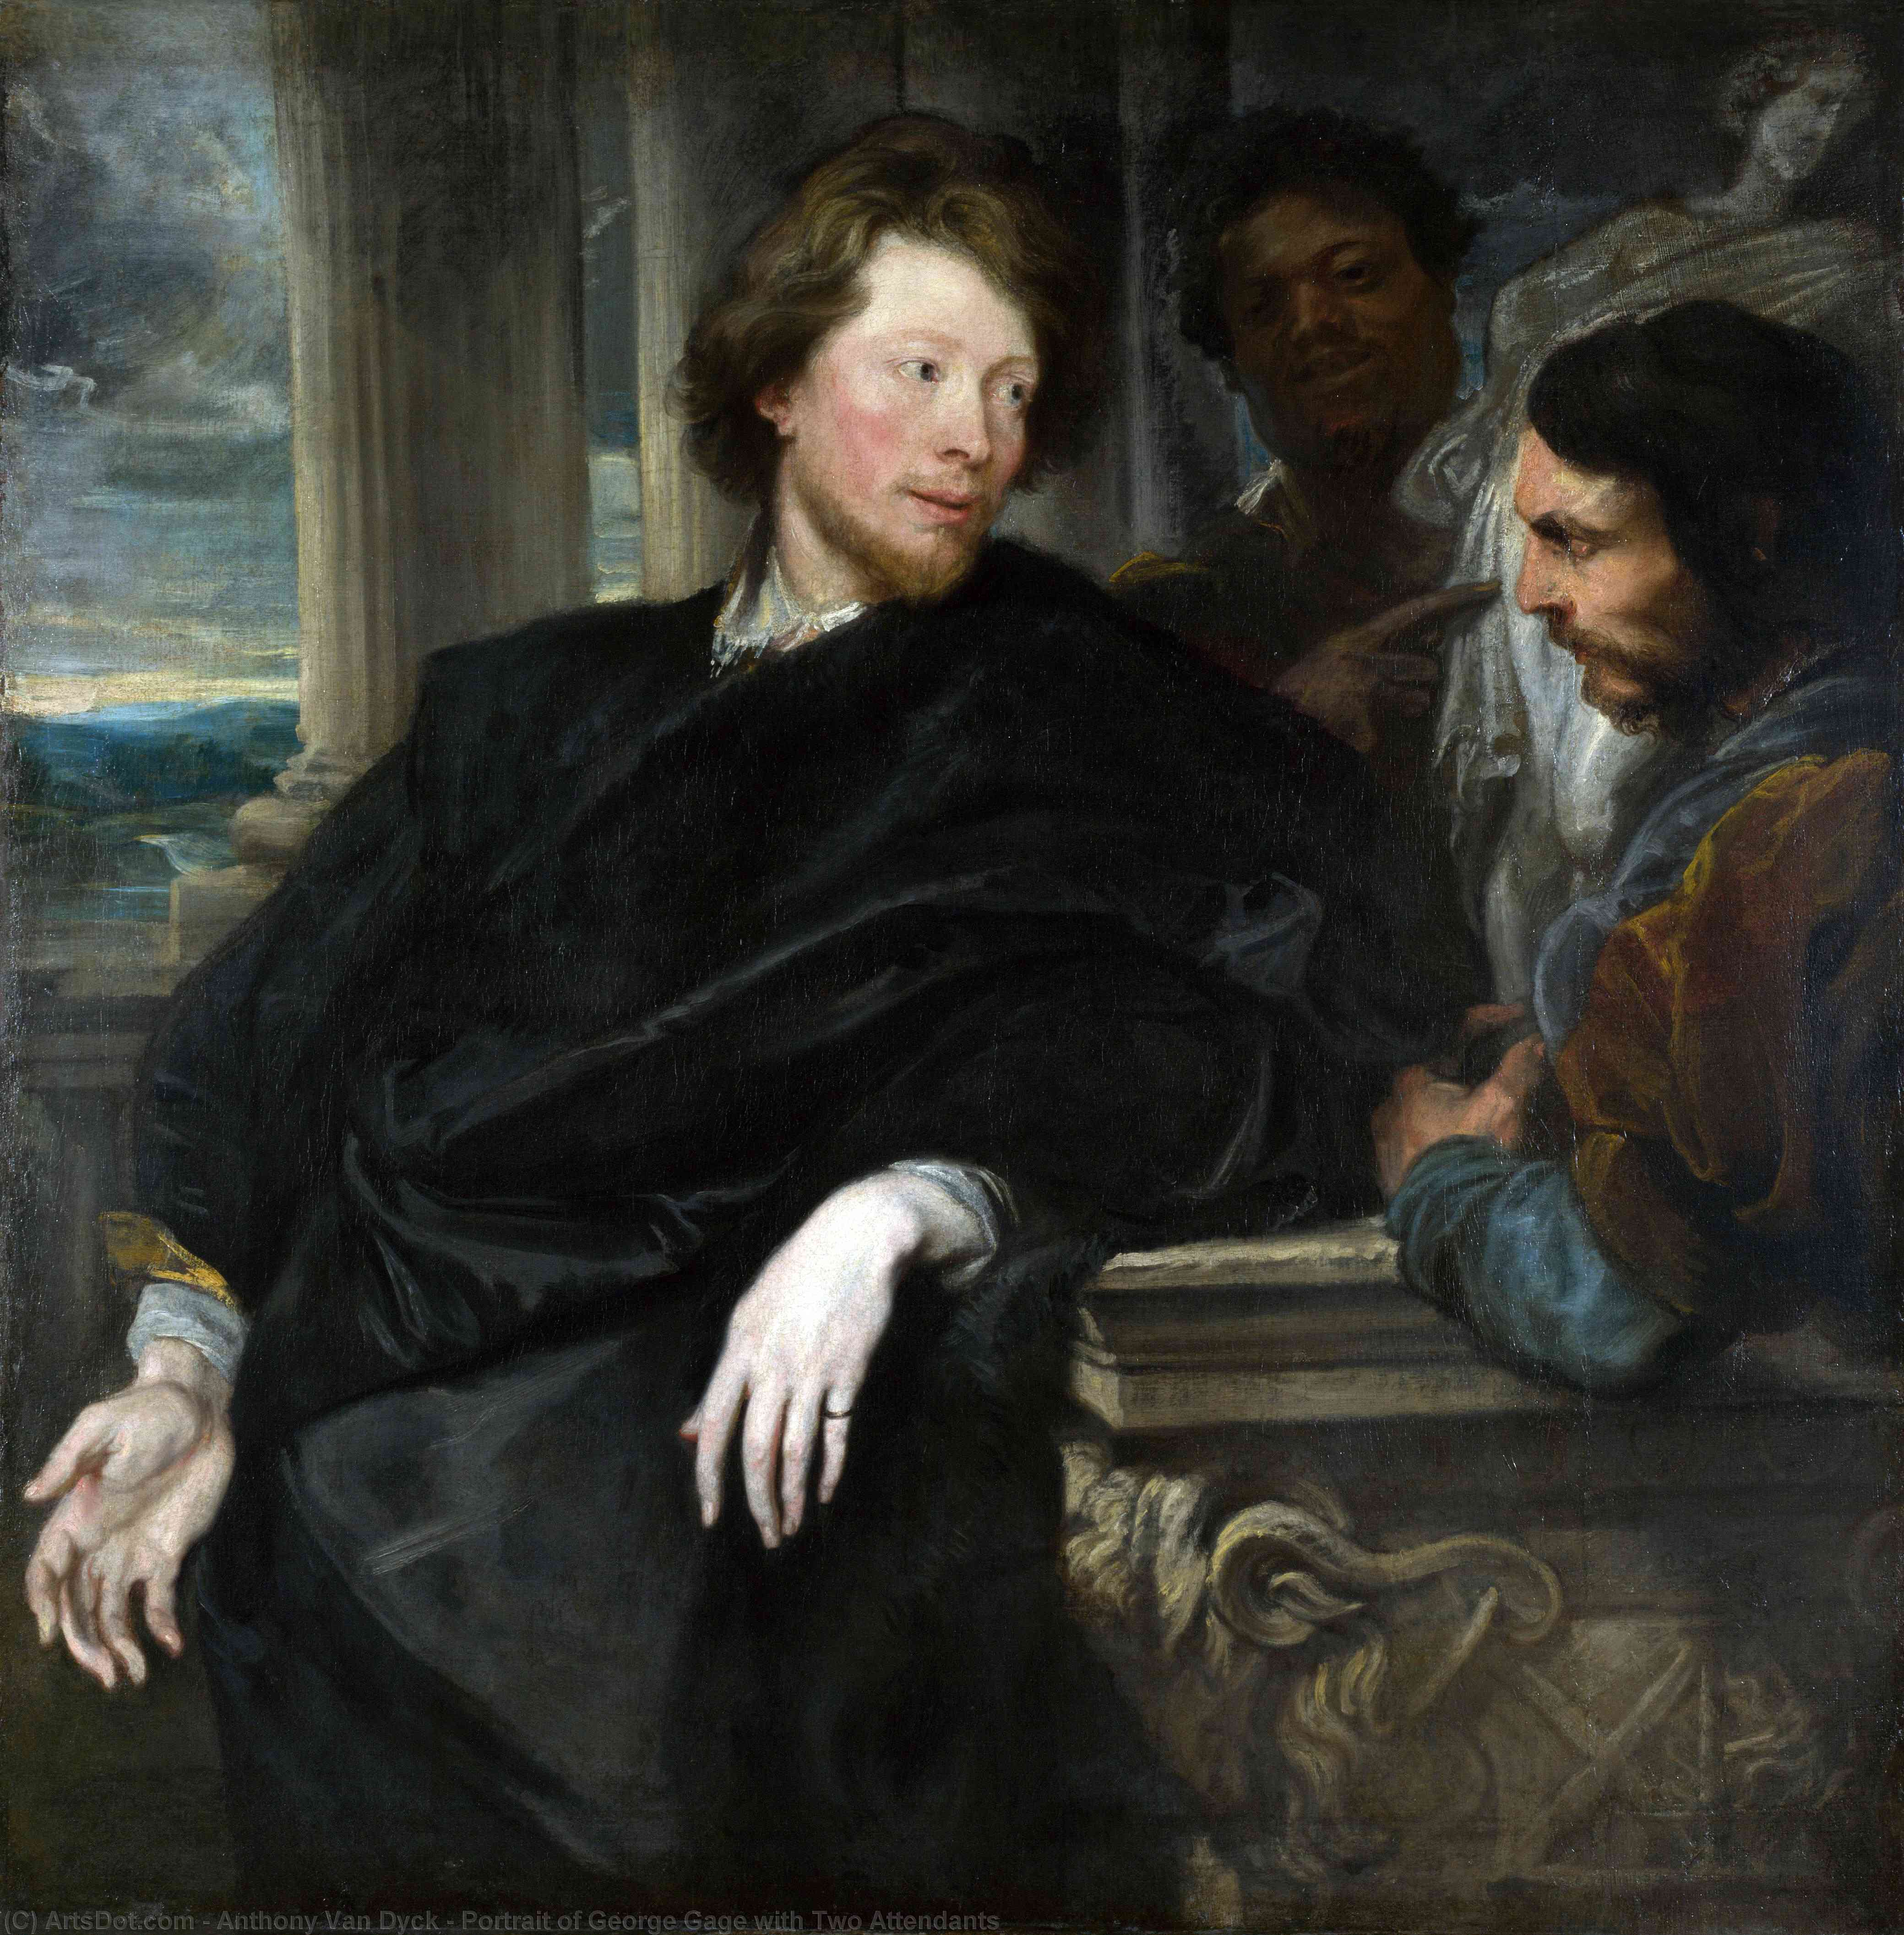 WikiOO.org - Encyclopedia of Fine Arts - Lukisan, Artwork Anthony Van Dyck - Portrait of George Gage with Two Attendants